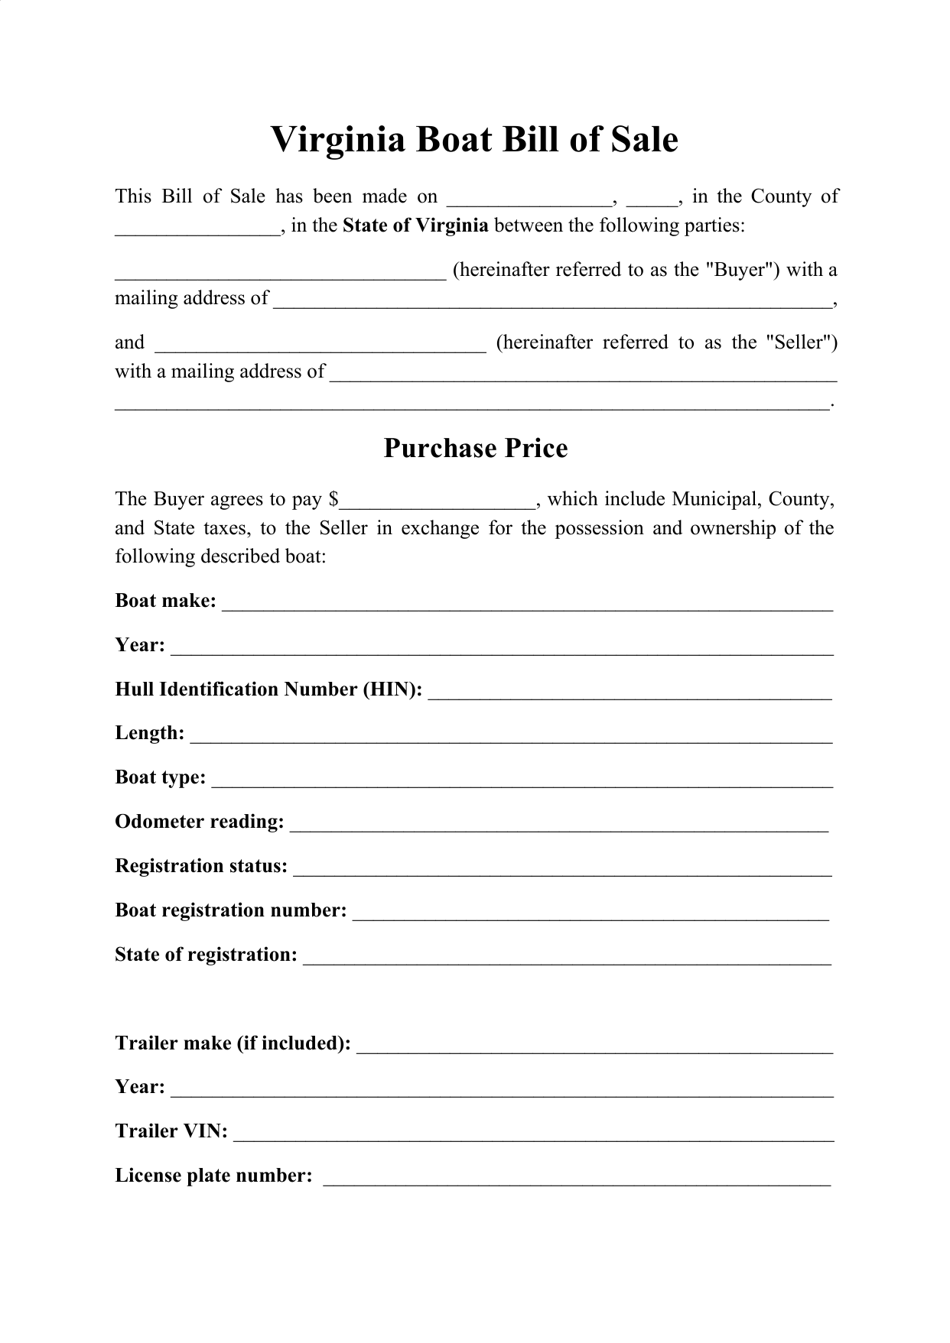 Virginia Boat Bill of Sale Form Fill Out Sign Online and Download